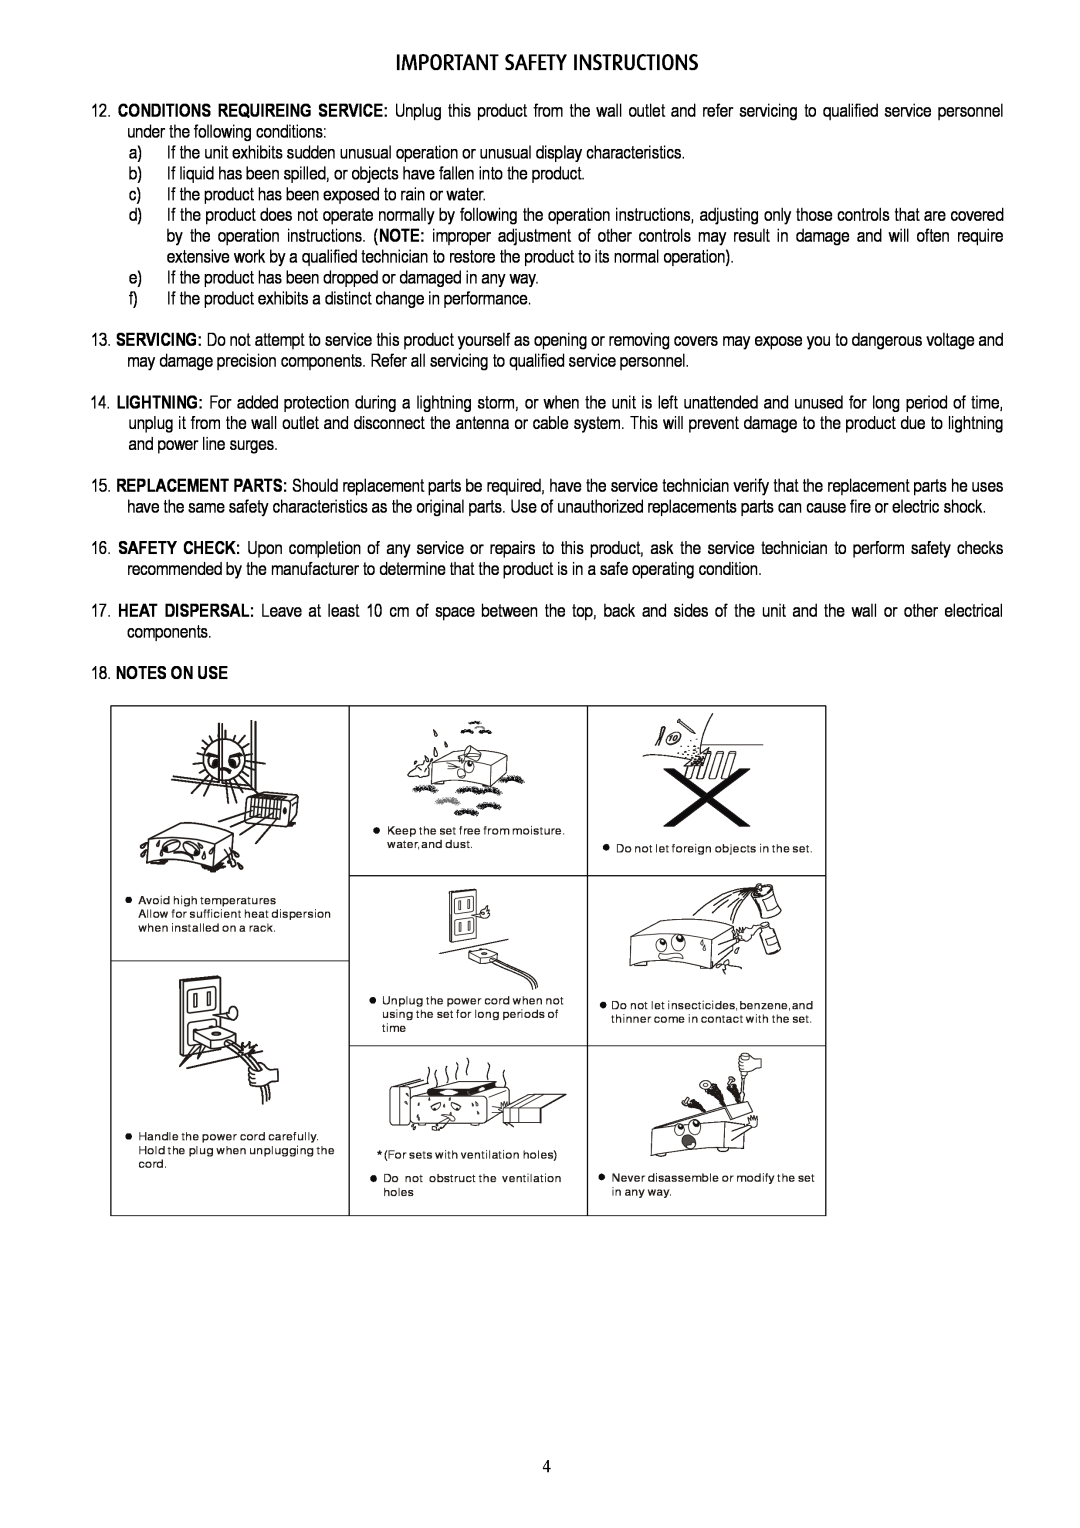 Eltax AVR-320 instruction manual Notes On Use, Important Safety Instructions 